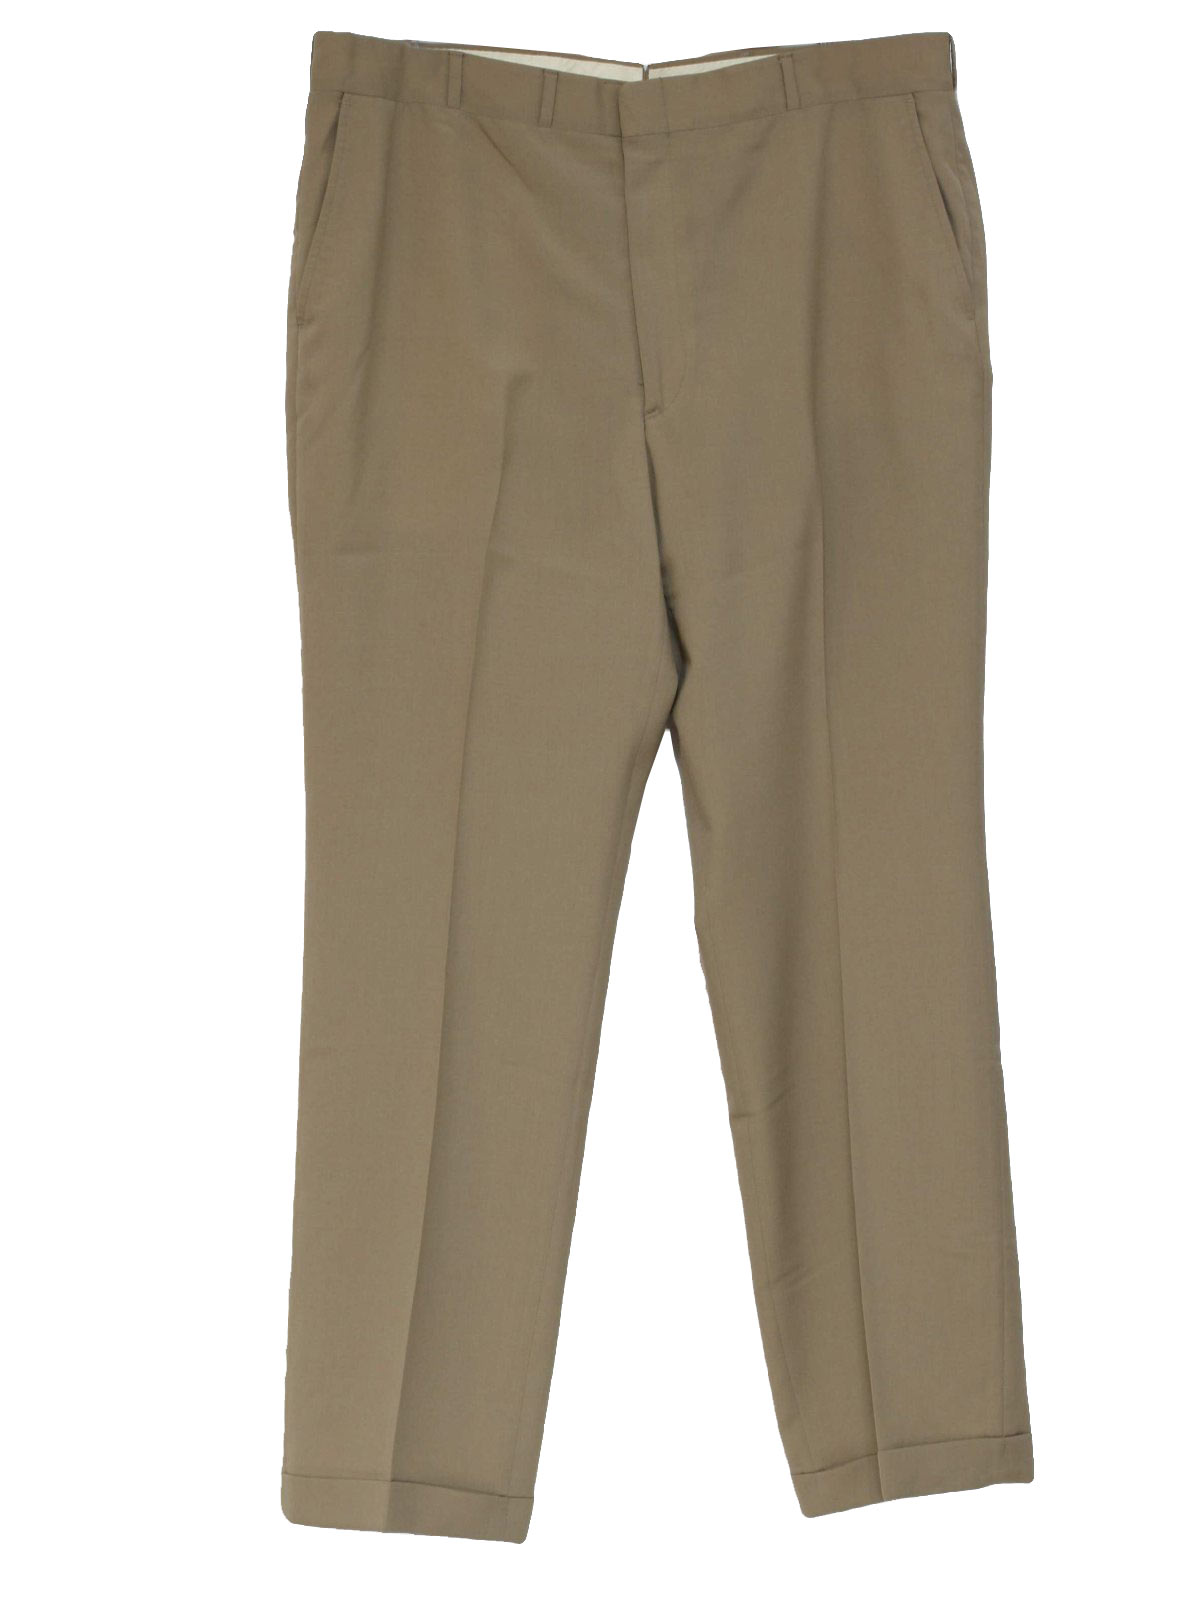 Mens 1960s Flat Front Wool Trousers with Tapered Legs